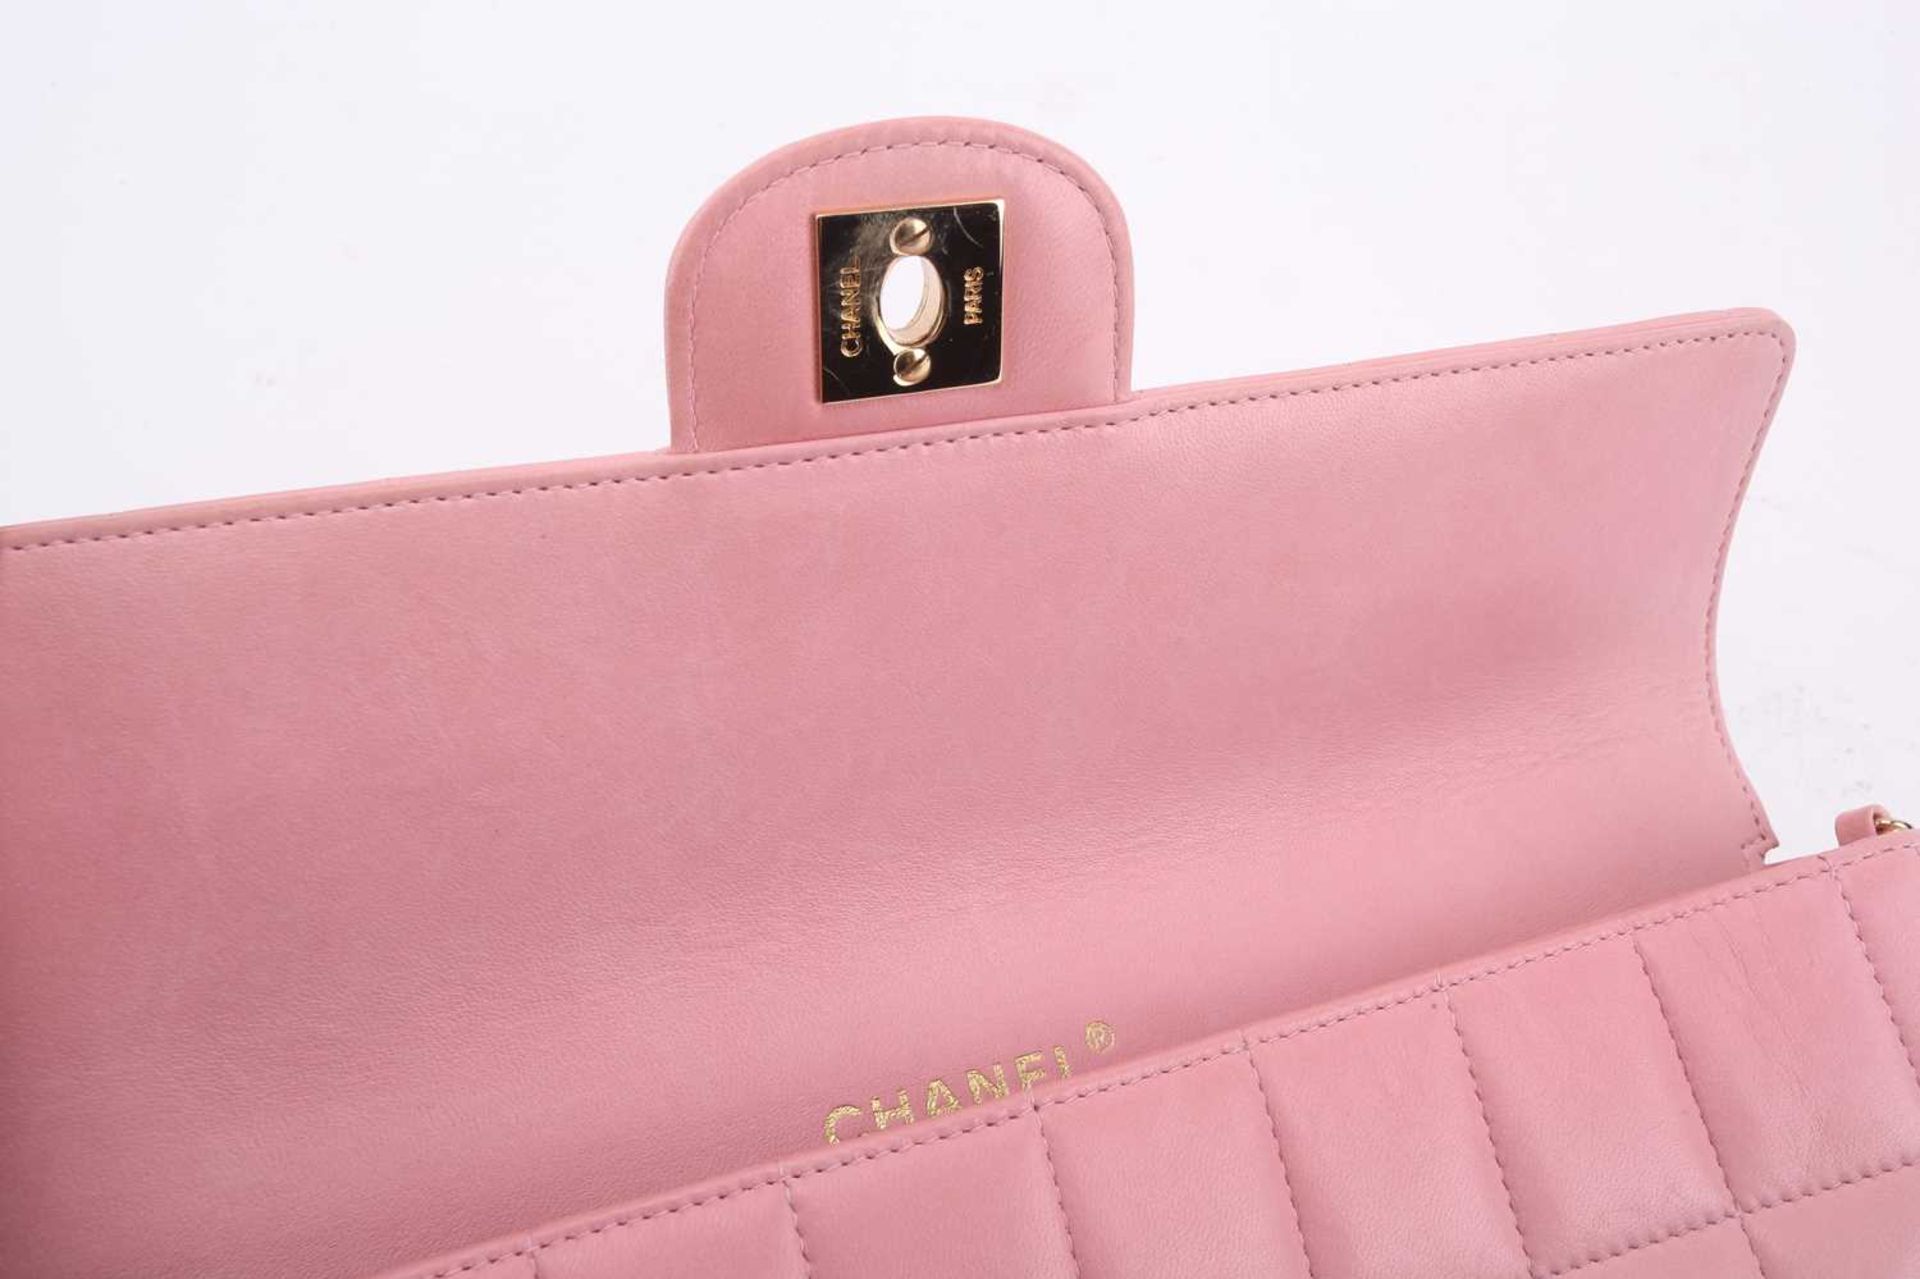 Chanel - an East West Chocolate Bar bag in baby pink lambskin leather, elongated rectangular body - Image 9 of 13